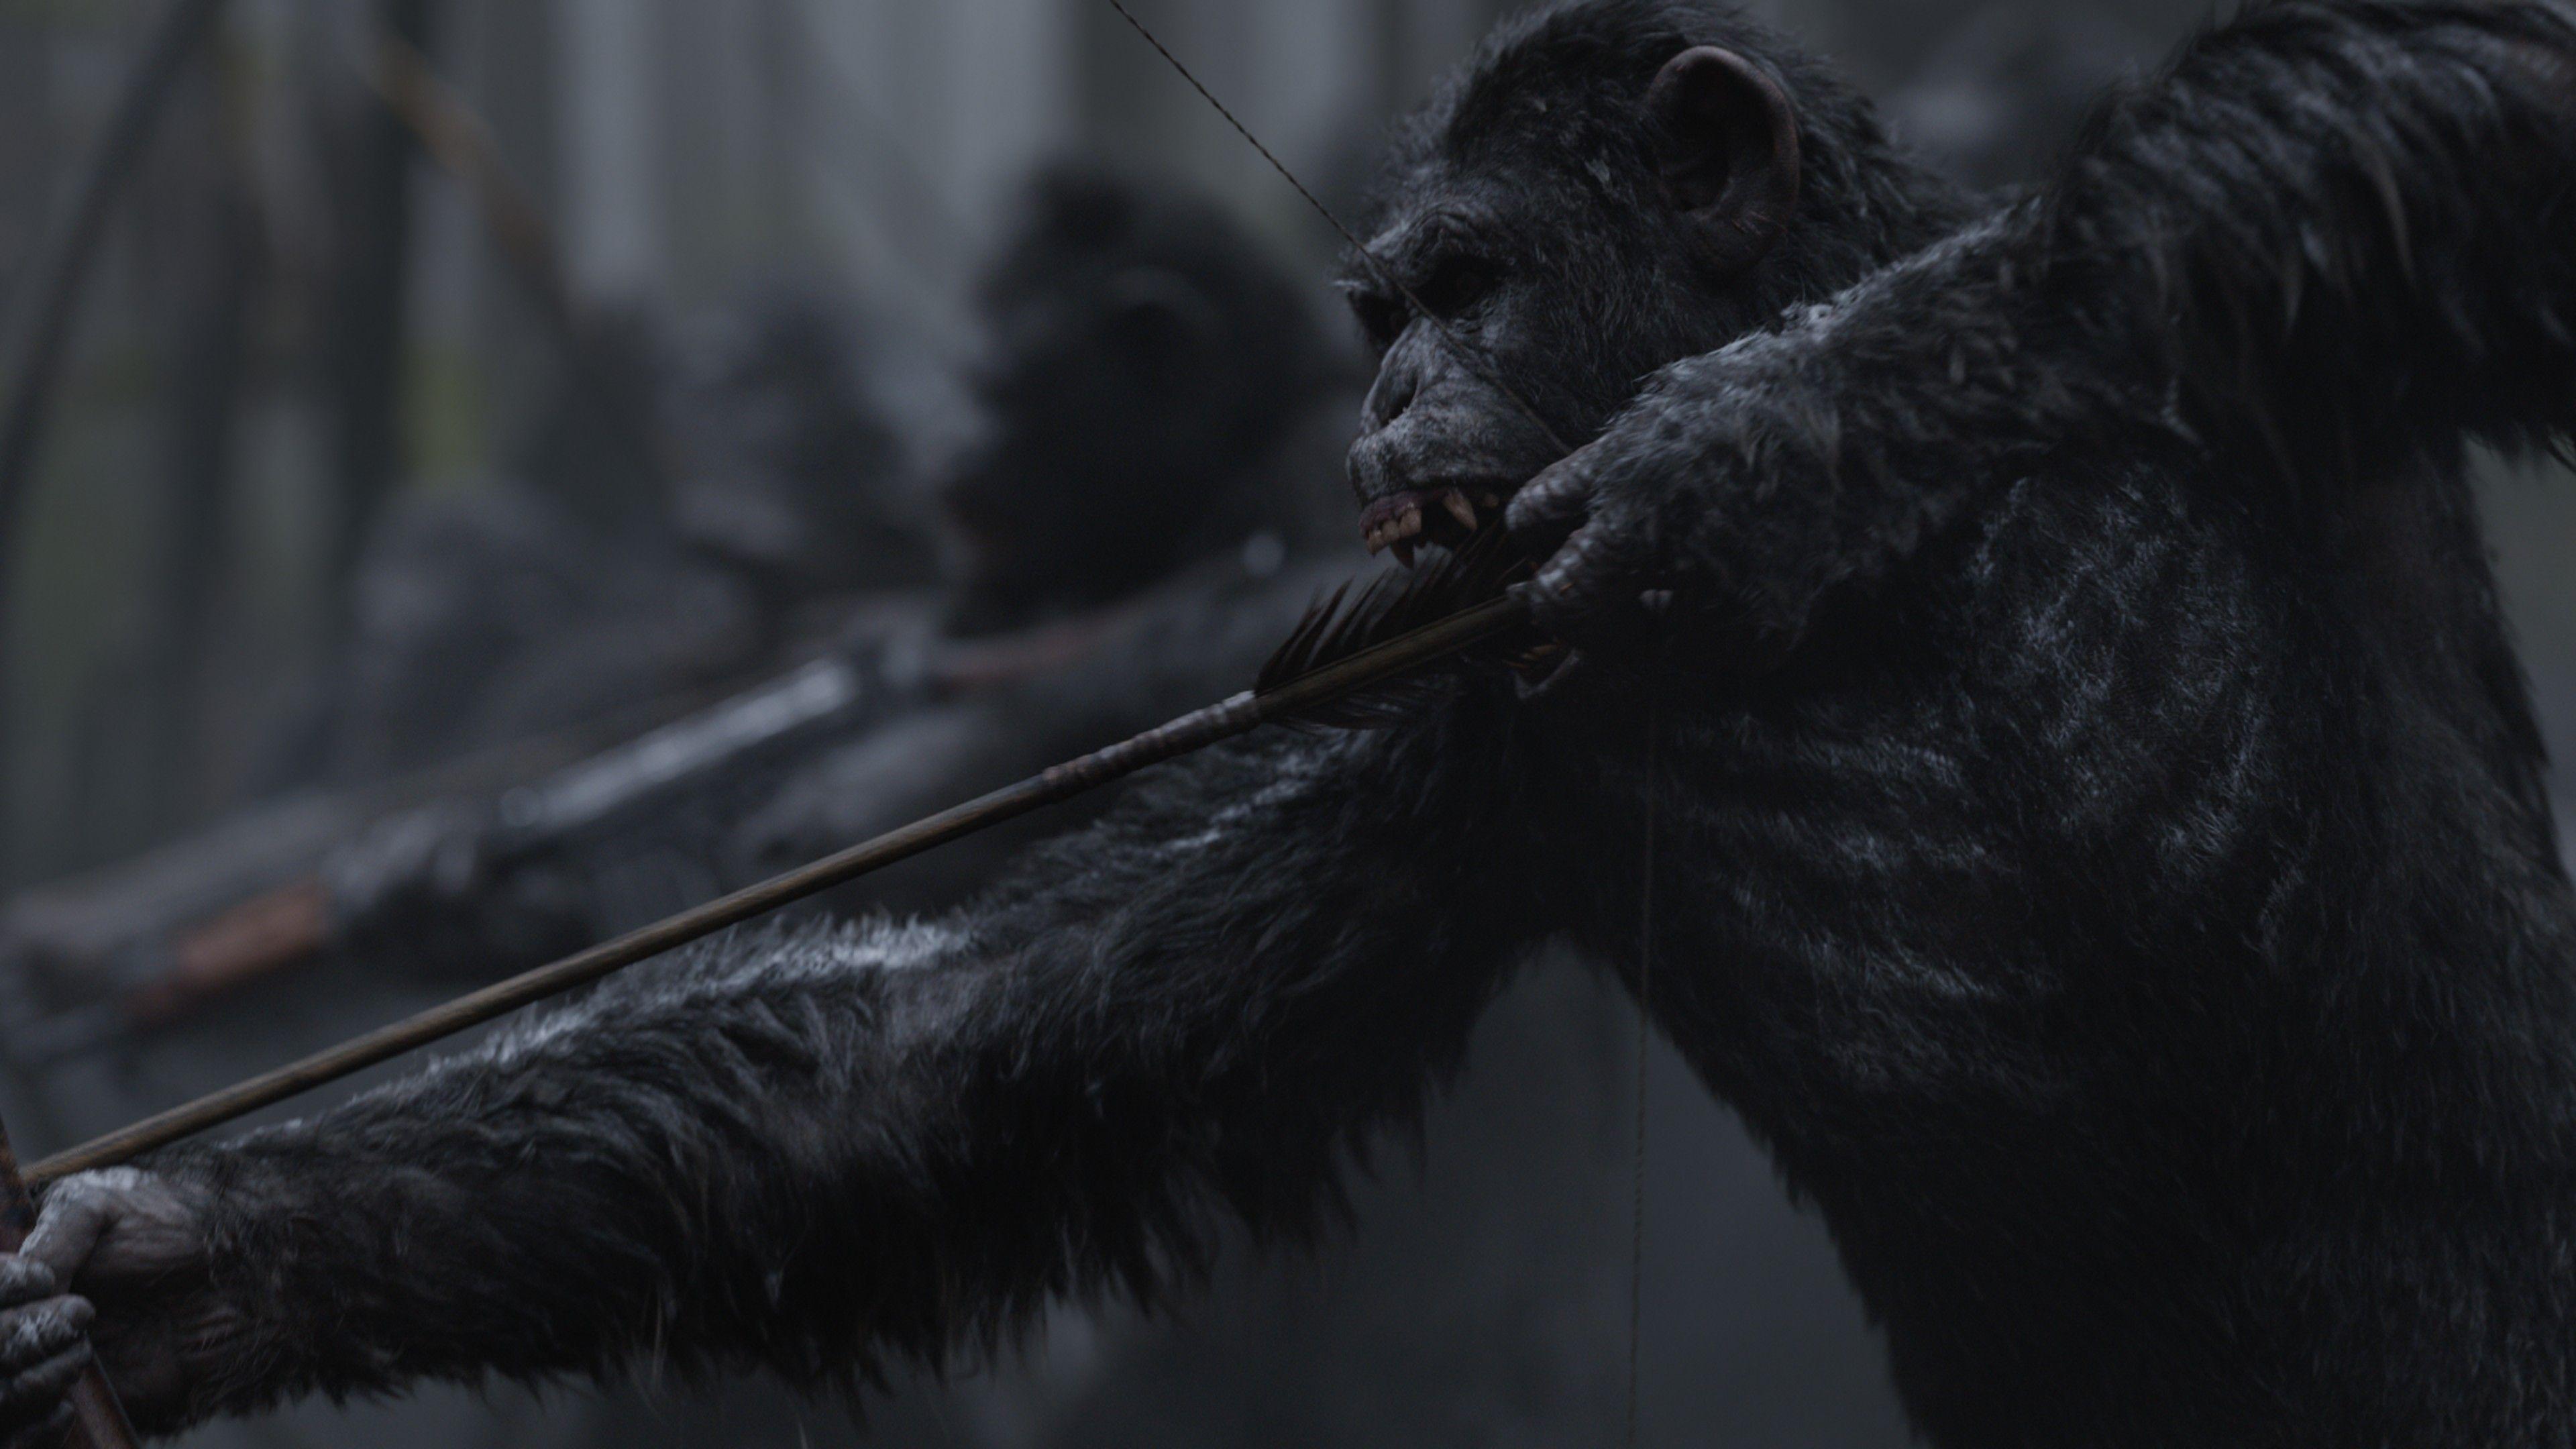 Wallpaper Caesar, War for the Planet of the Apes, 2017 Movies, HD